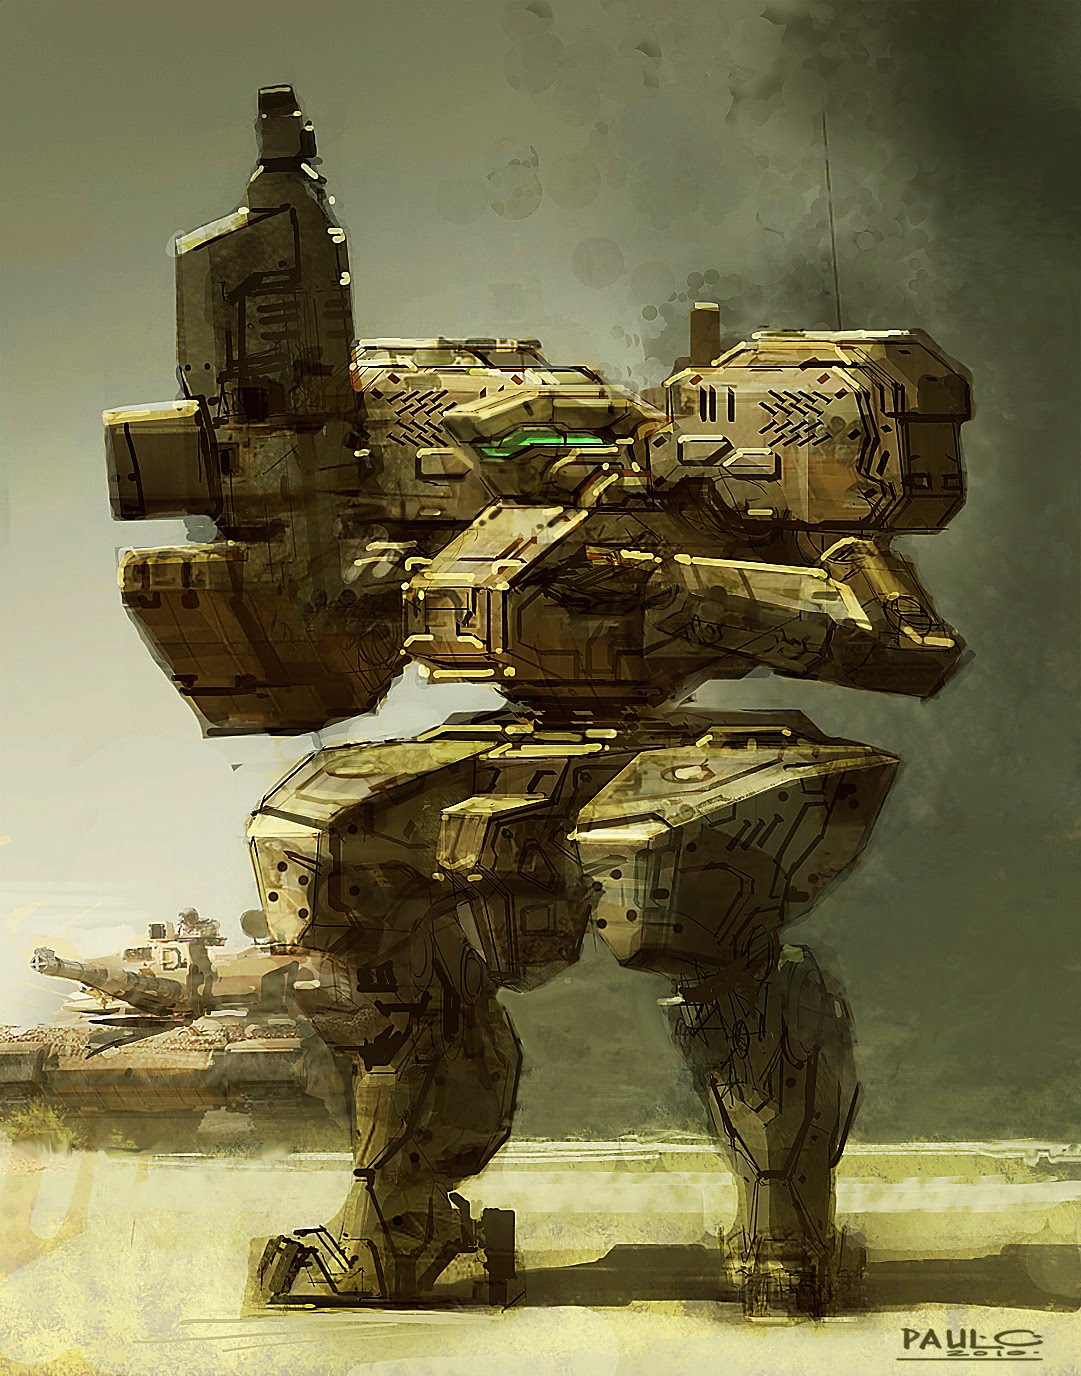 Paul Christopher's Concept Blog: CGMA Mech and Vehicle Design Class